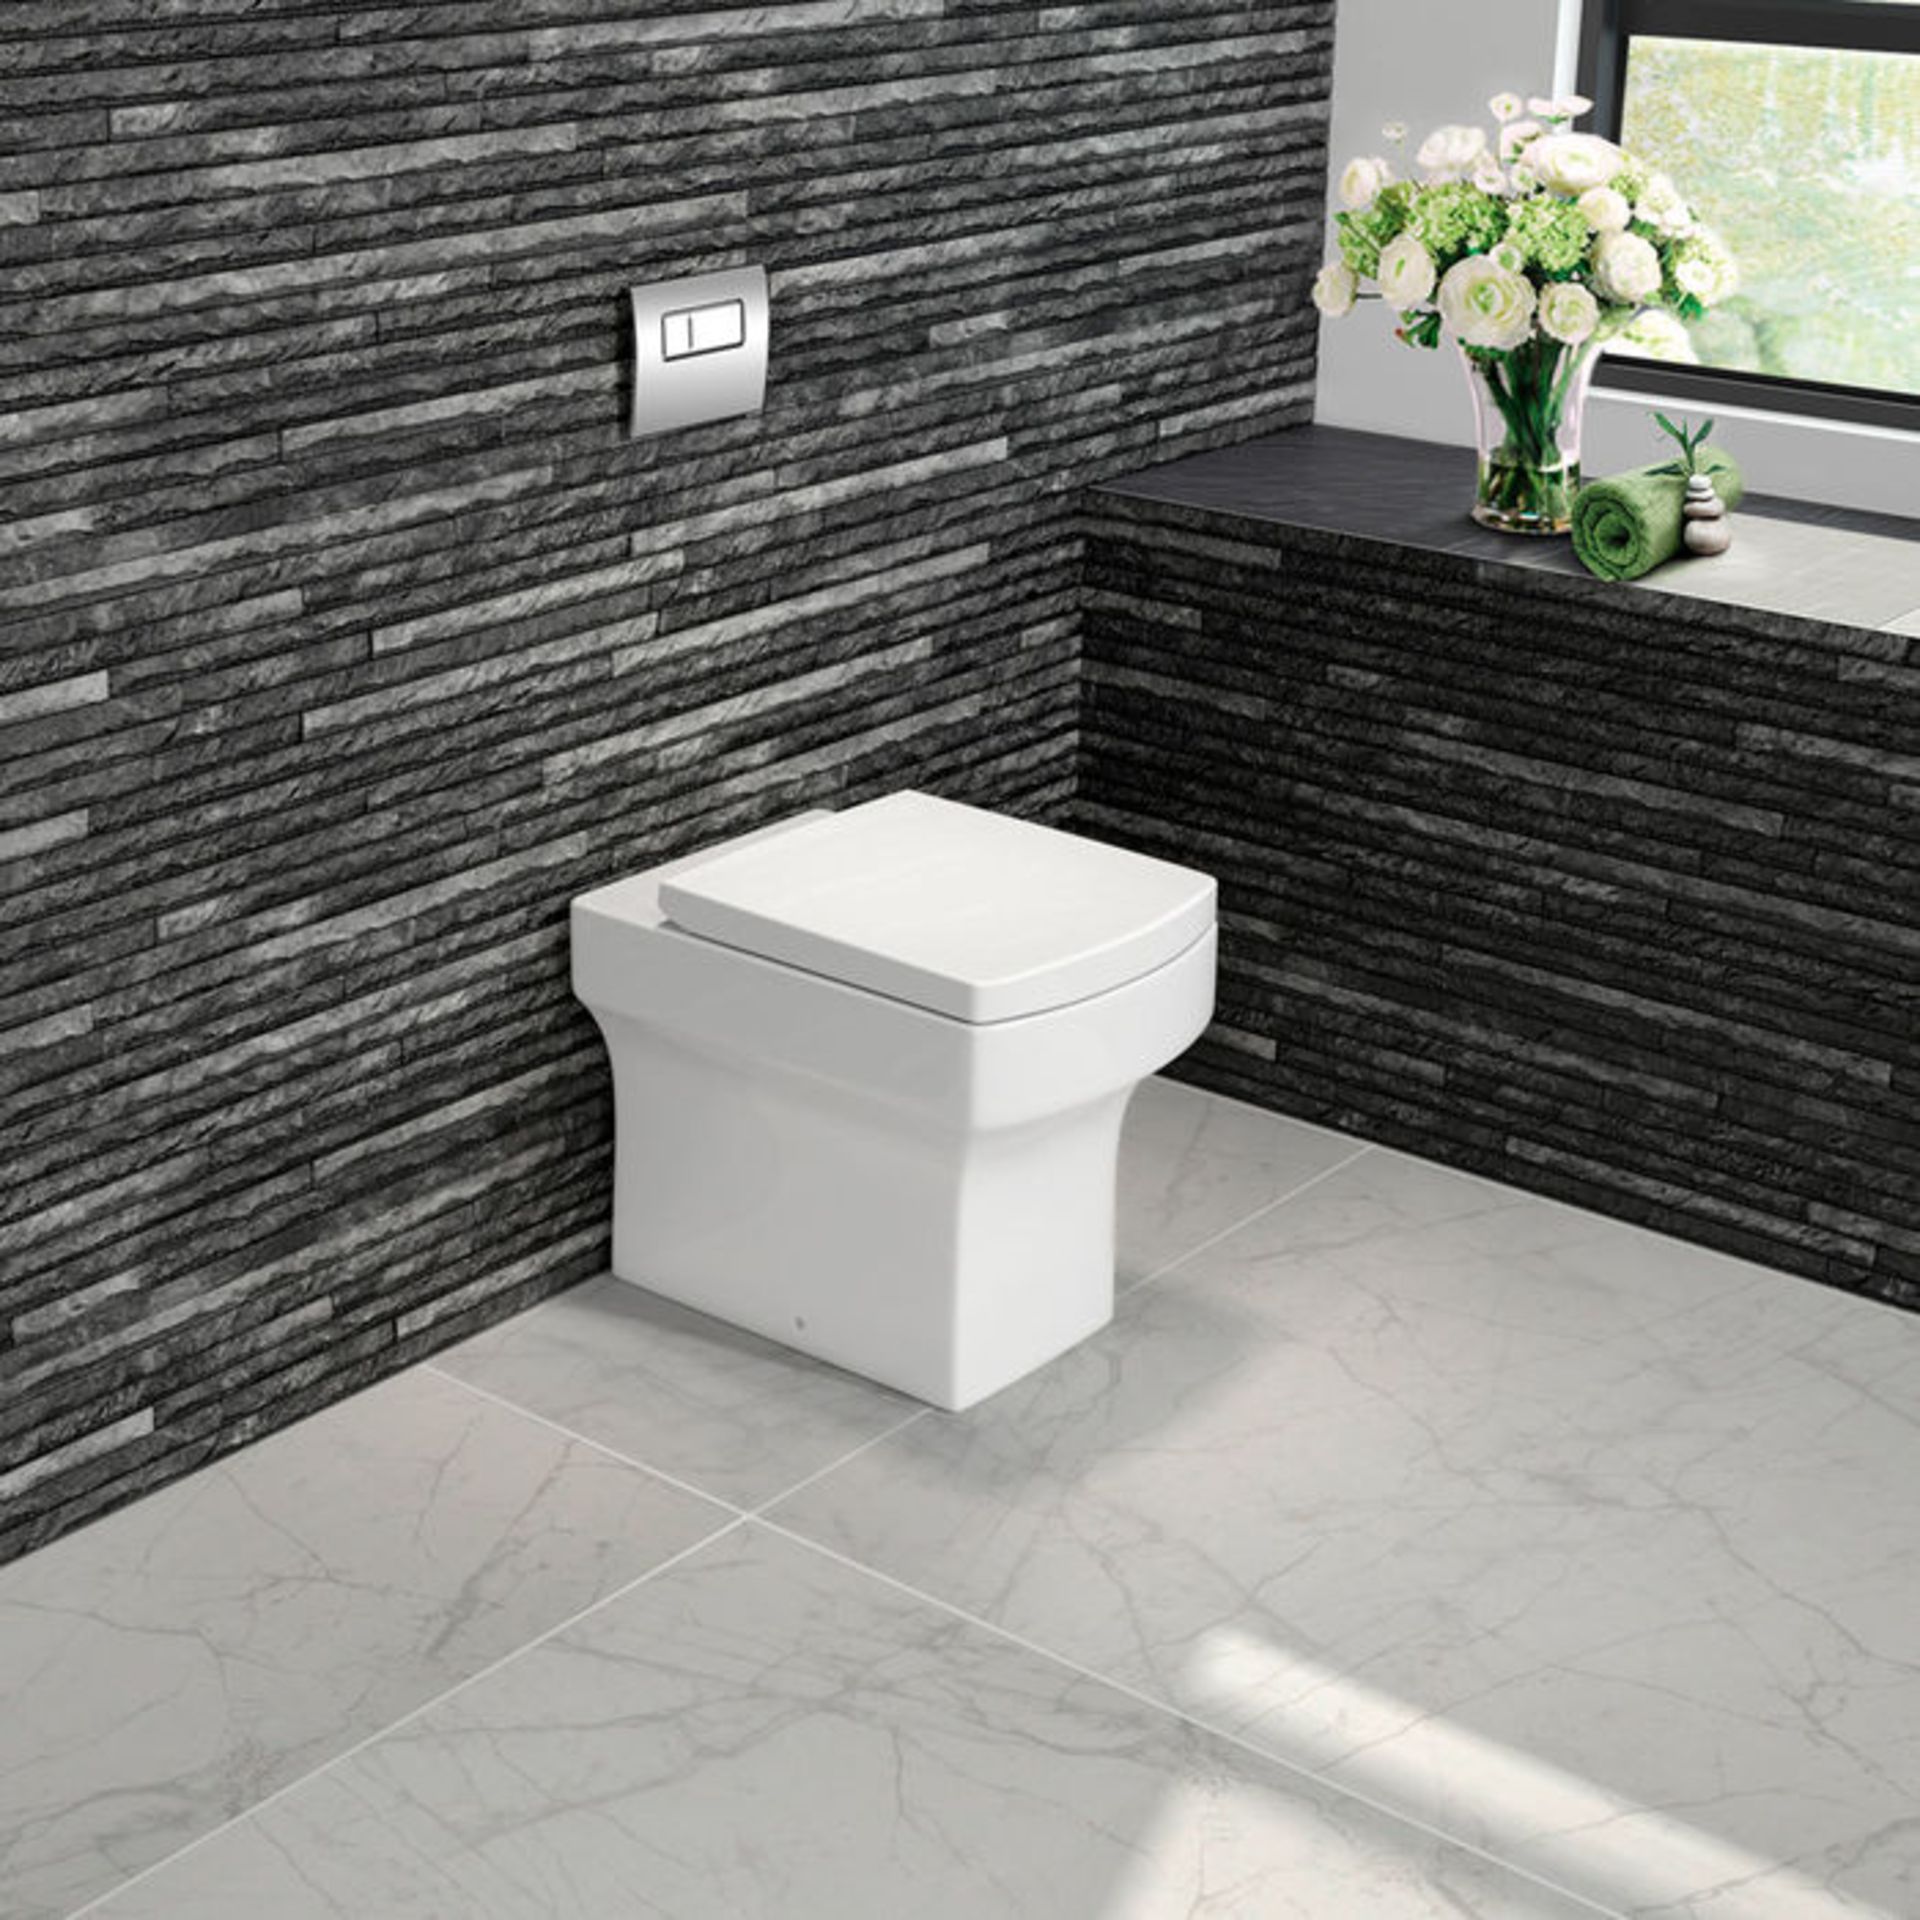 (ZL180) Belfort Back to Wall Toilet inc Soft Close Seat. Made from White Vitreous China Anti-scratch - Image 2 of 4